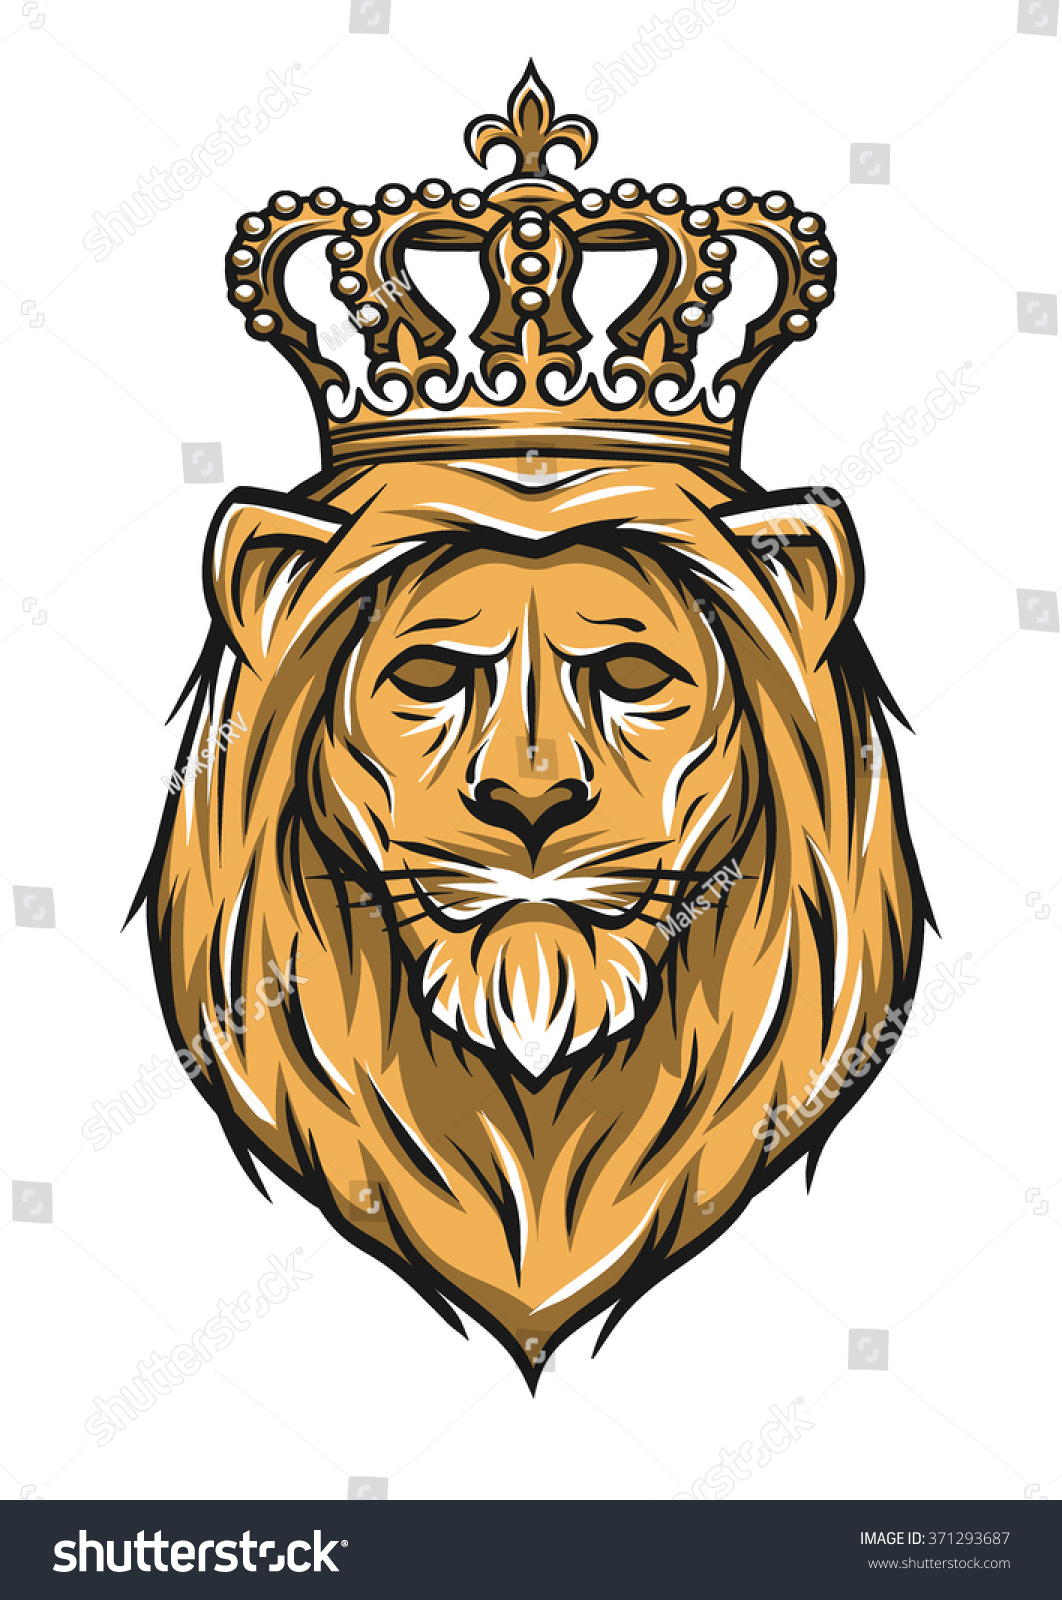 lion with crown clipart - photo #49